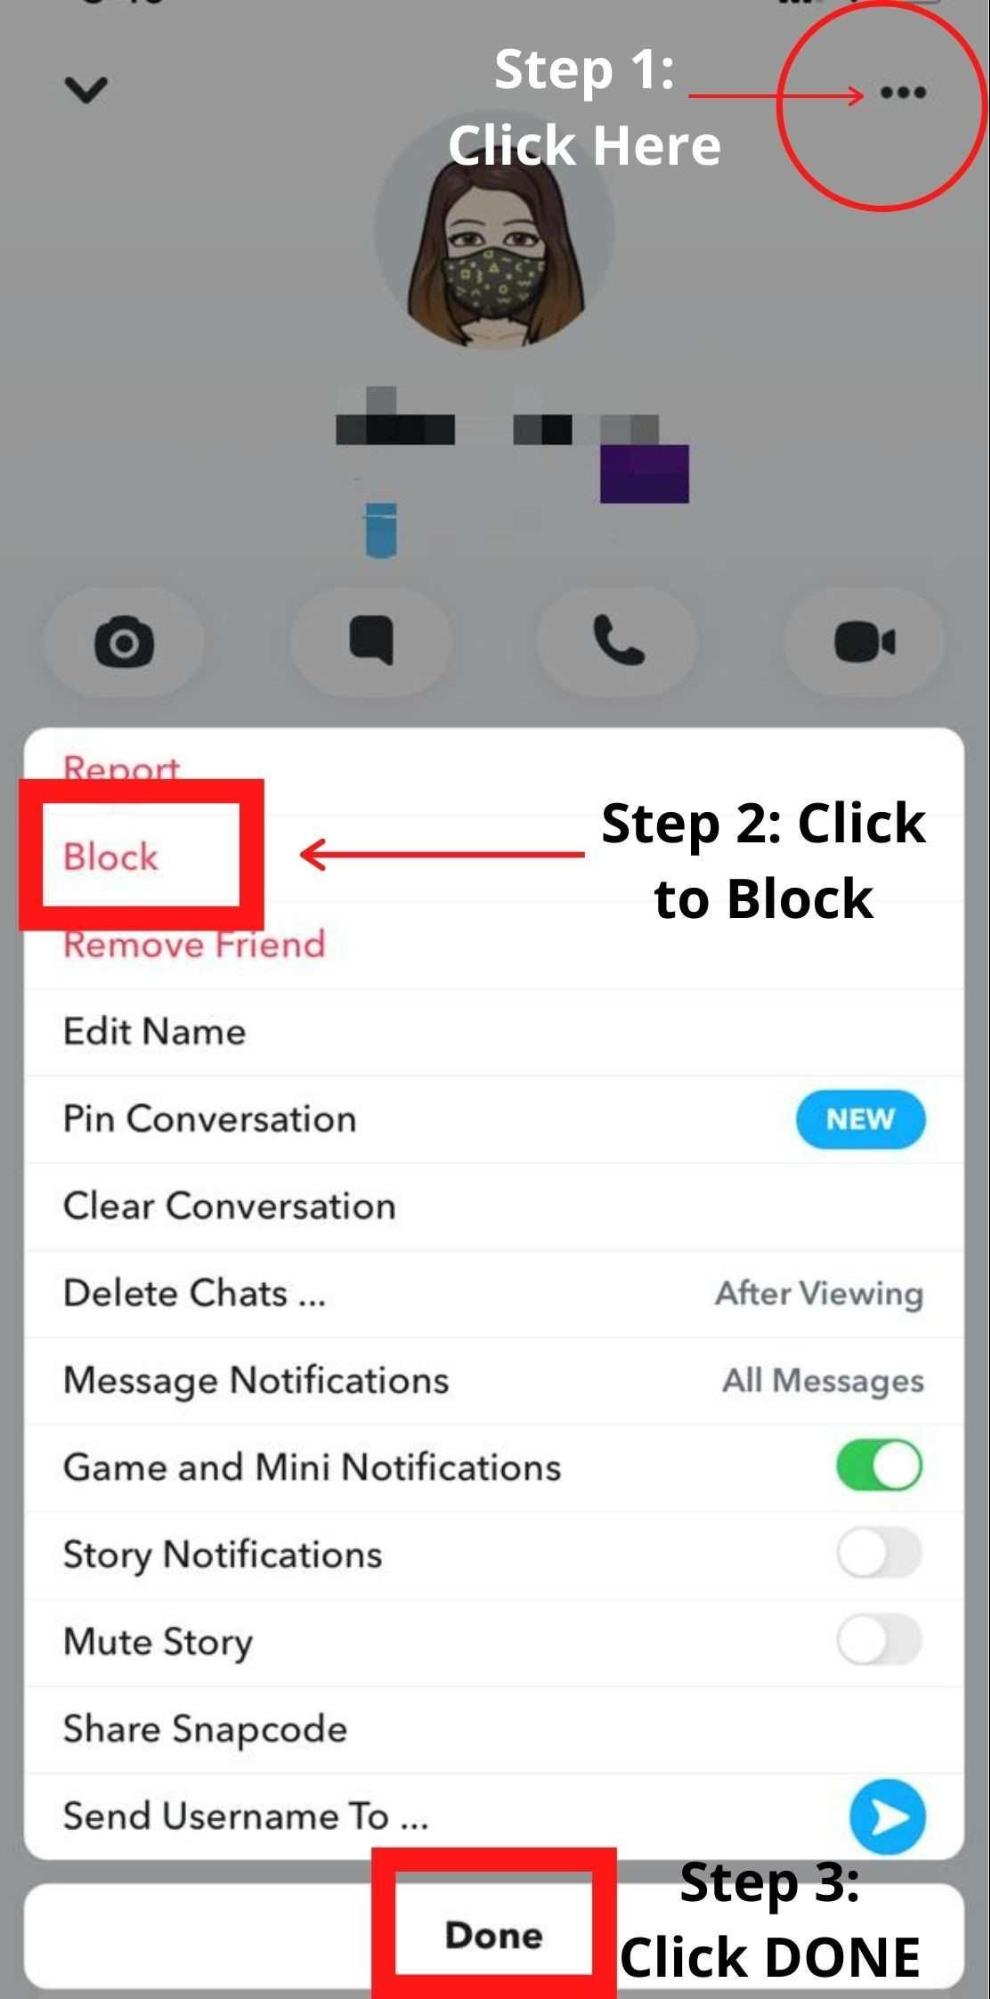 How to Unblock Yourself on Snapchat?